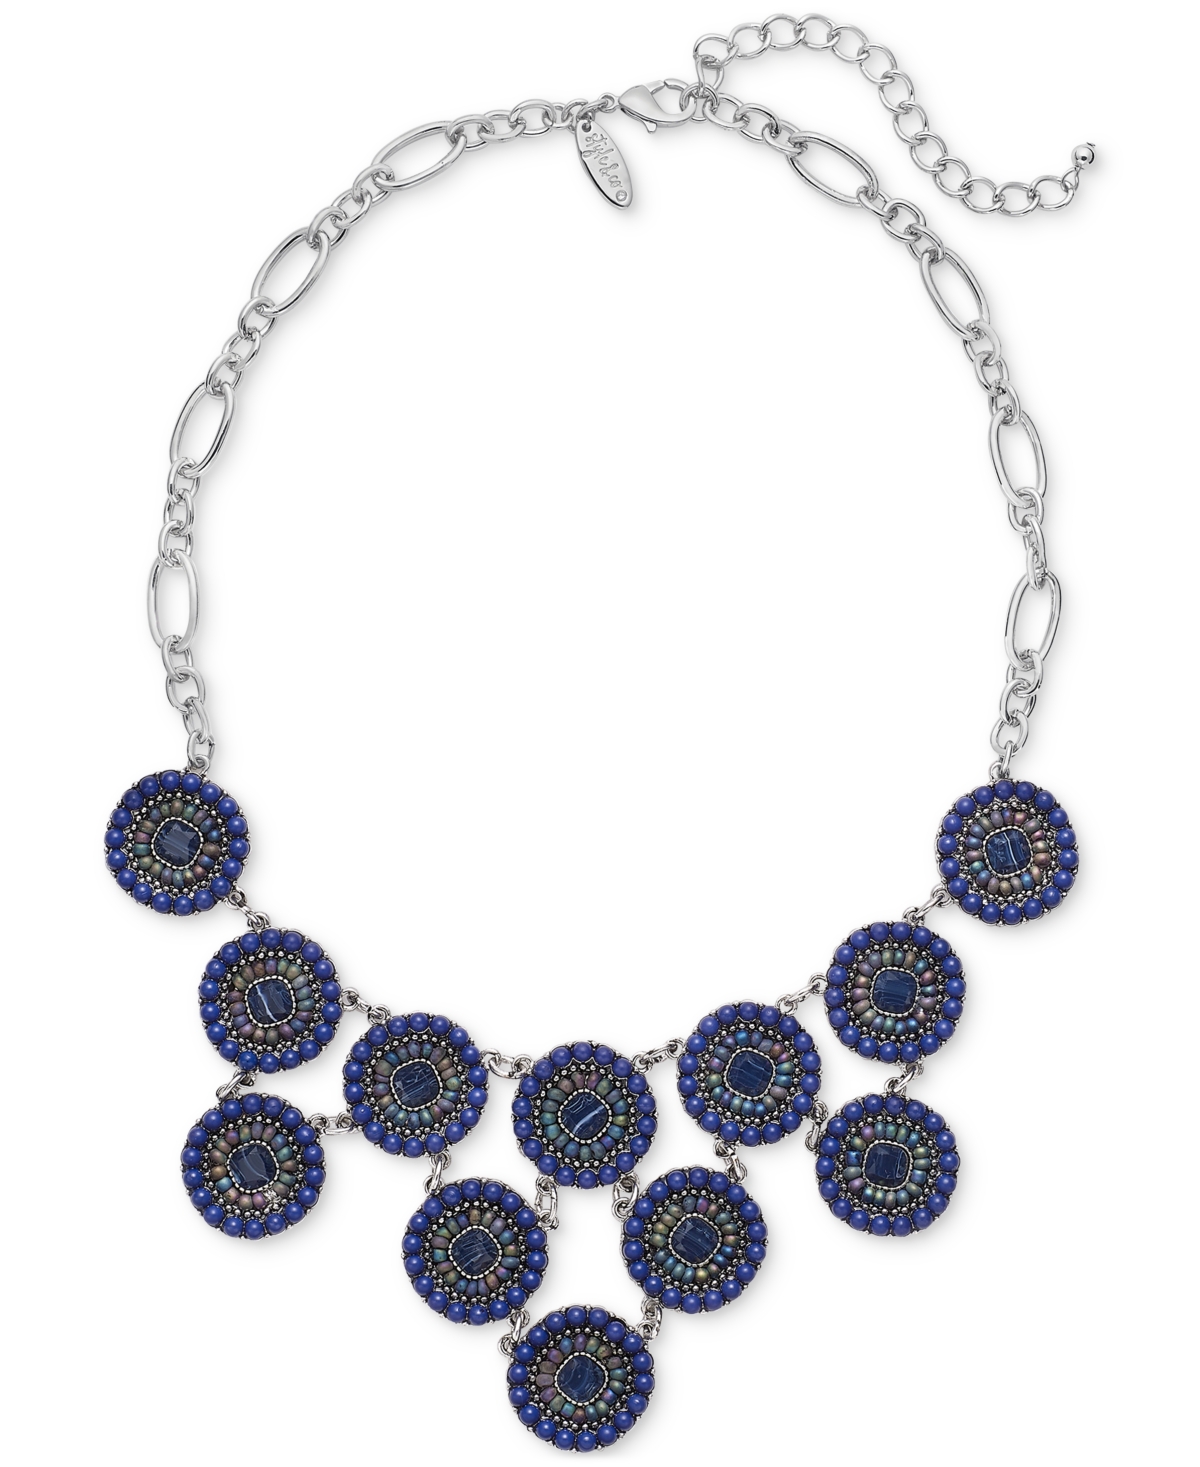 Beaded Circle Statement Necklace, 17" + 3" extender, Created for Macy's - Multi